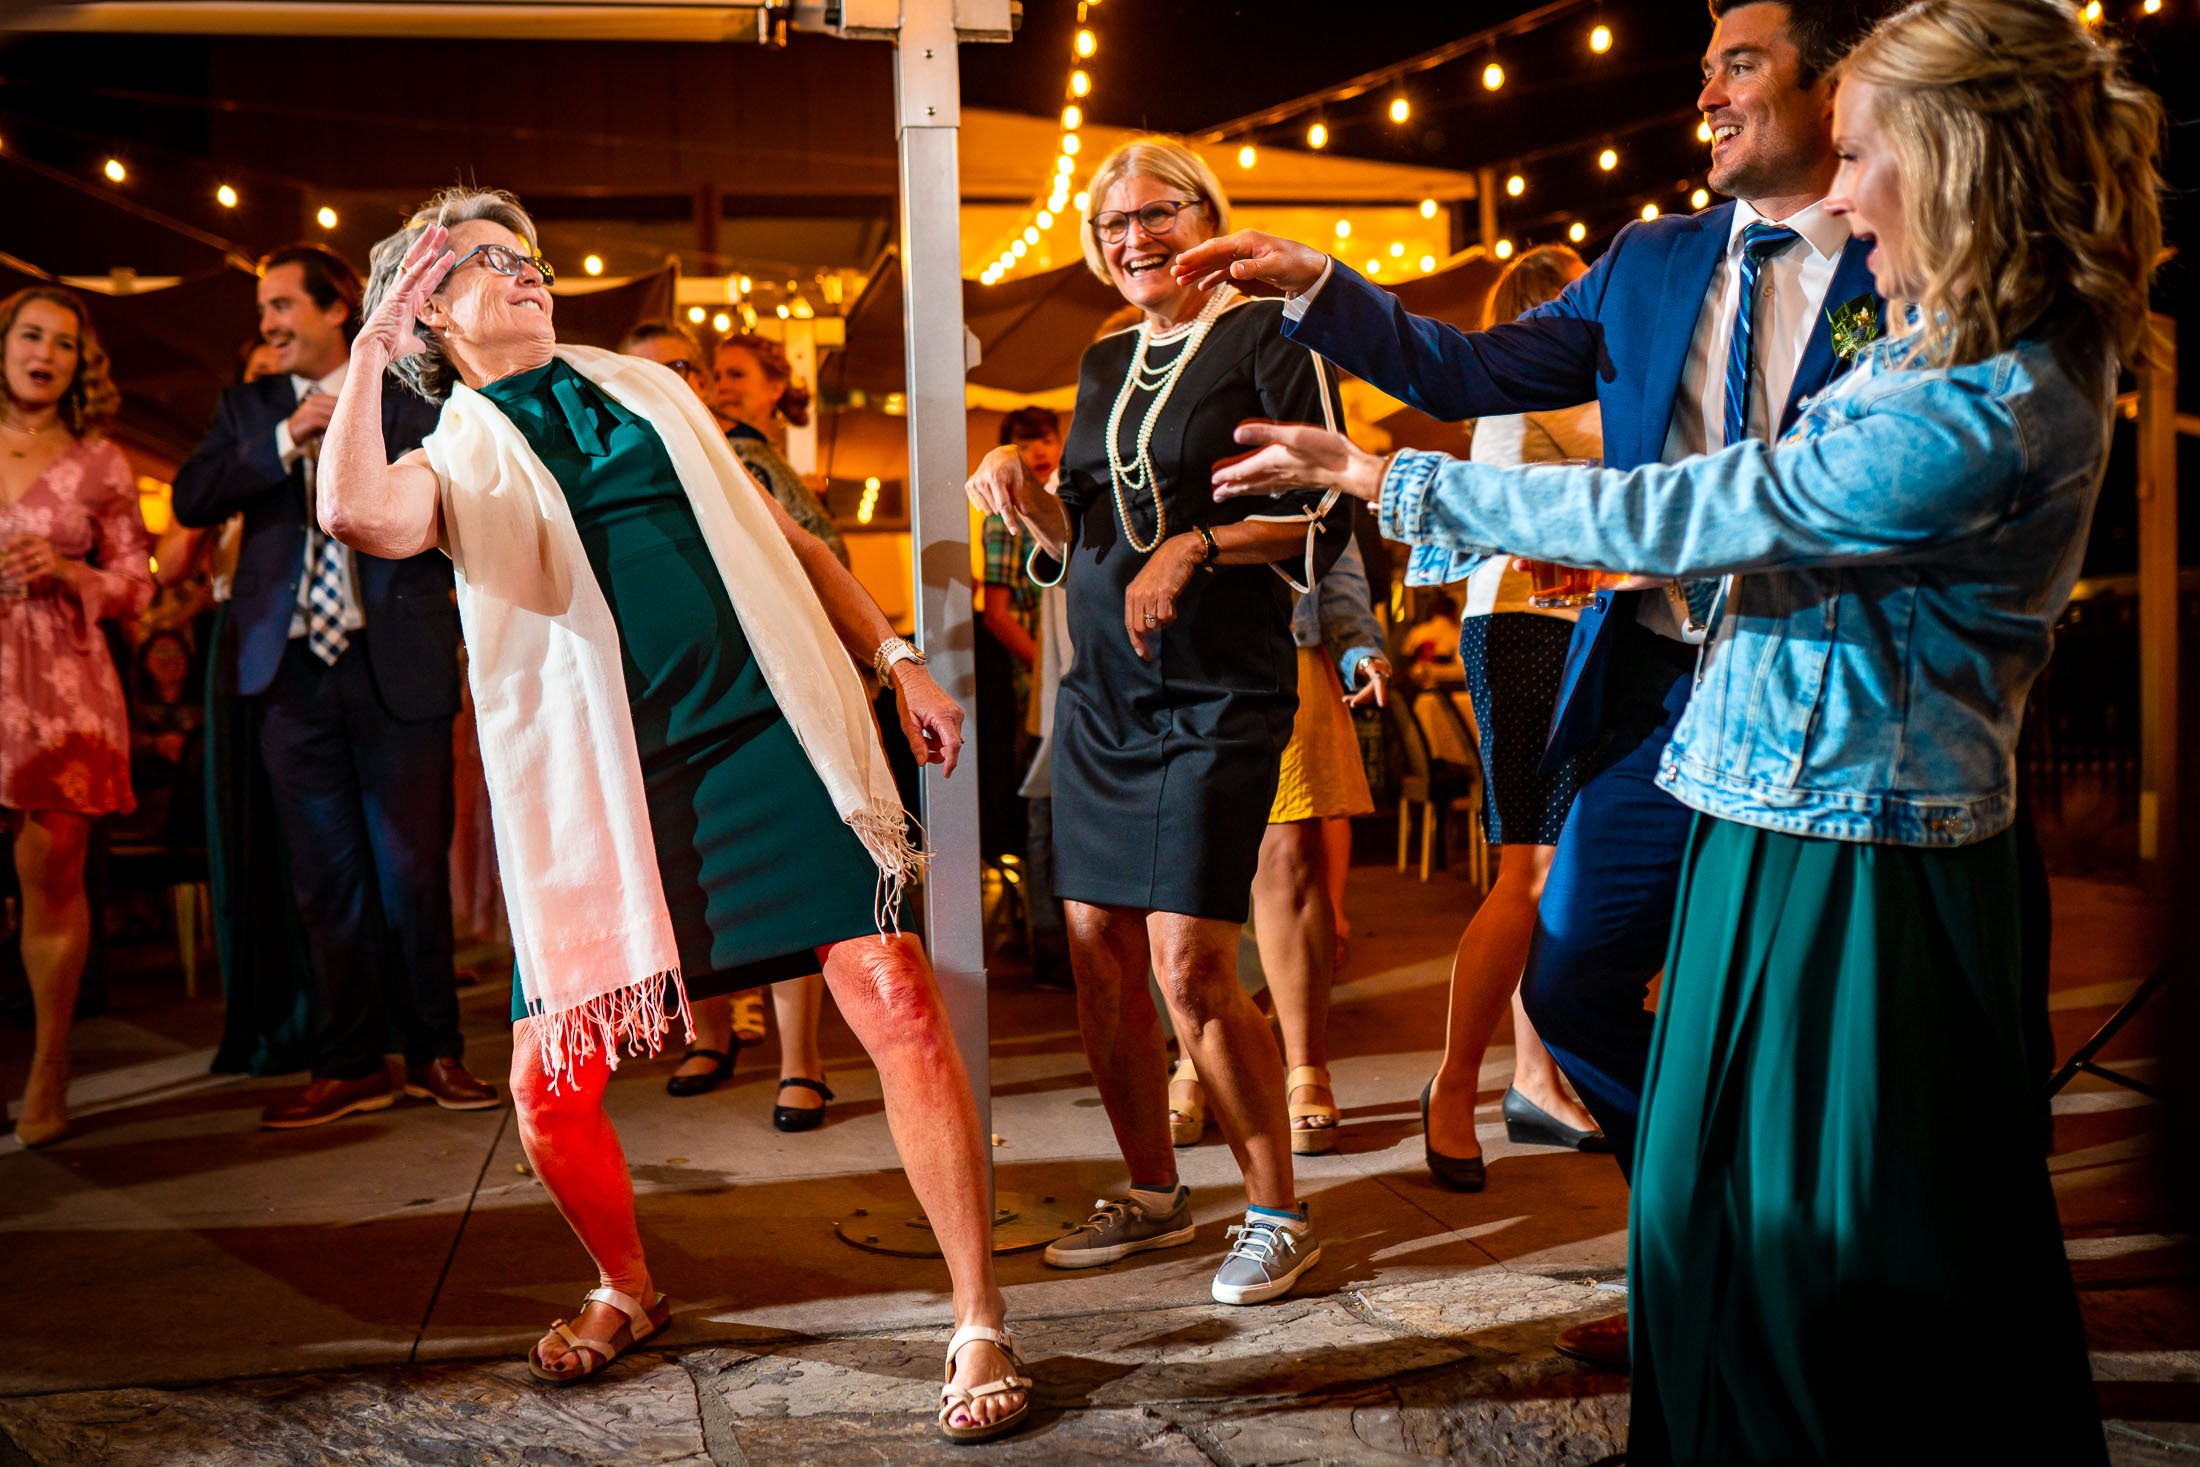 Guests dance to music on the outdoor patio under cafe lights during the wedding reception, wedding, wedding photos, wedding photography, wedding photographer, wedding inspiration, wedding photo inspiration, wedding portraits, wedding ceremony, wedding reception, mountain wedding, Catholic Church wedding, Catholic Church wedding photos, Catholic Church wedding photography, Catholic Church wedding photographer, Catholic Church wedding inspiration, Catholic Church wedding venue, Steamboat Springs wedding, Steamboat Springs wedding photos, Steamboat Springs wedding photography, Steamboat Springs wedding photographer, Colorado wedding, Colorado wedding photos, Colorado wedding photography, Colorado wedding photographer, Colorado mountain wedding, Colorado wedding inspiration